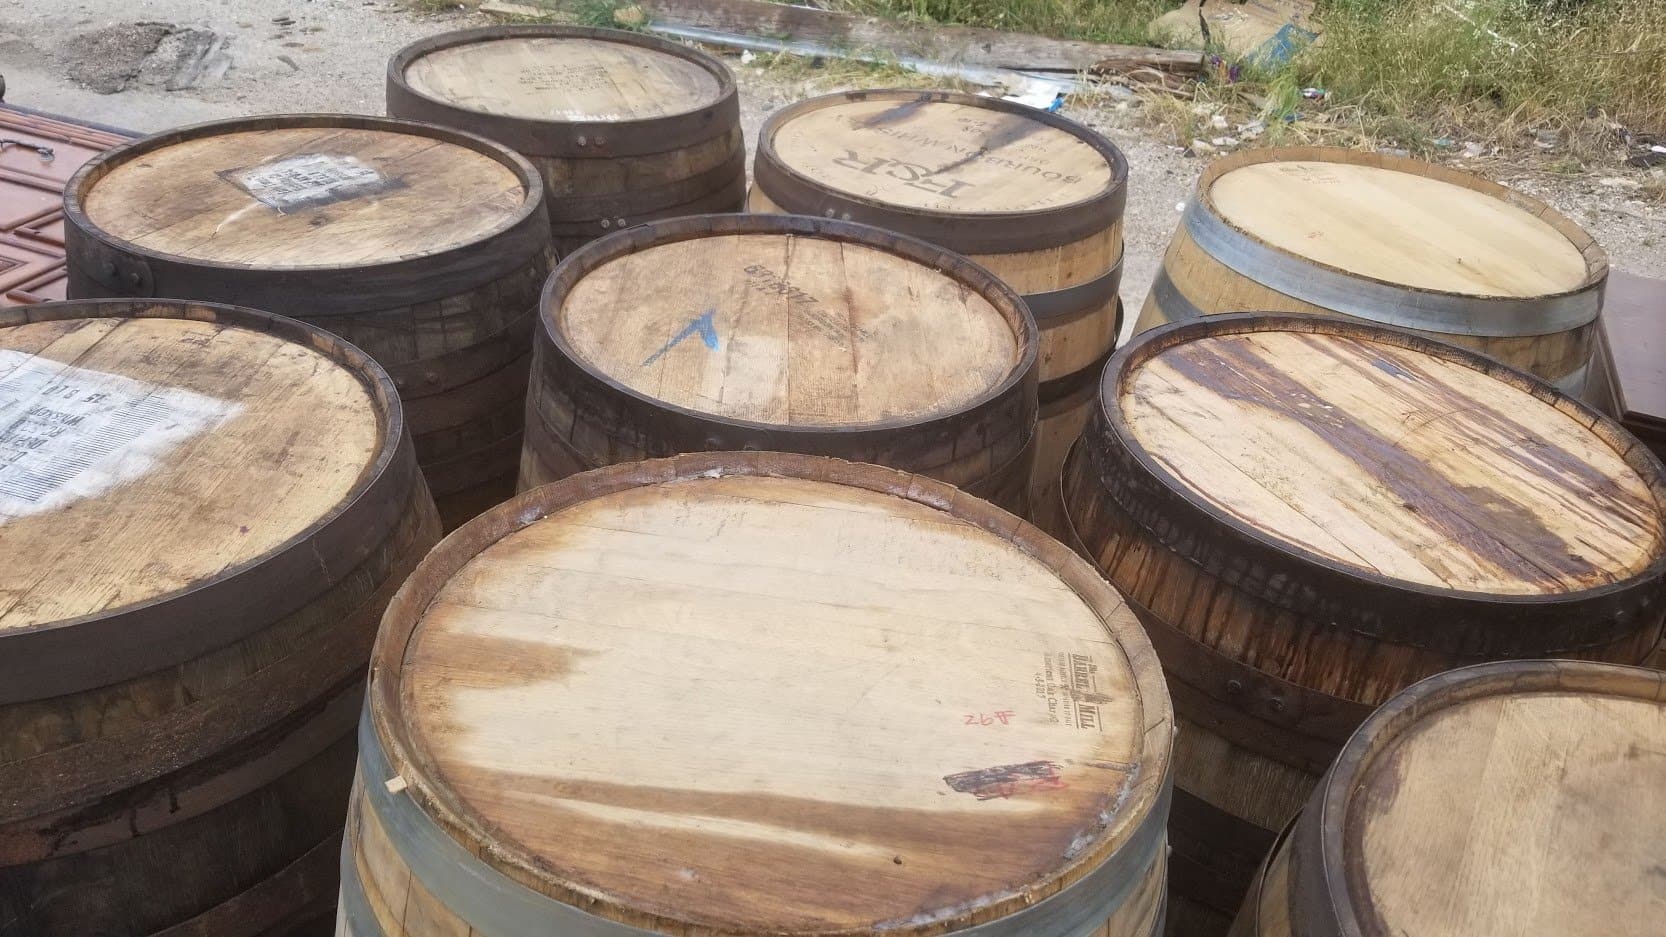 Genuine Bourbon & Whiskey Barrels-FREE SHIPPING -  Raw & Rustic - Gently Cleaned all bands fastened & secured Bands, Man Cave, Man Cave Bar, Whiskey Barrel, Wine Barrel, Mancave Bar, Bar Table, Patio Table, Barrel Table - Get Groovy Deals Texas